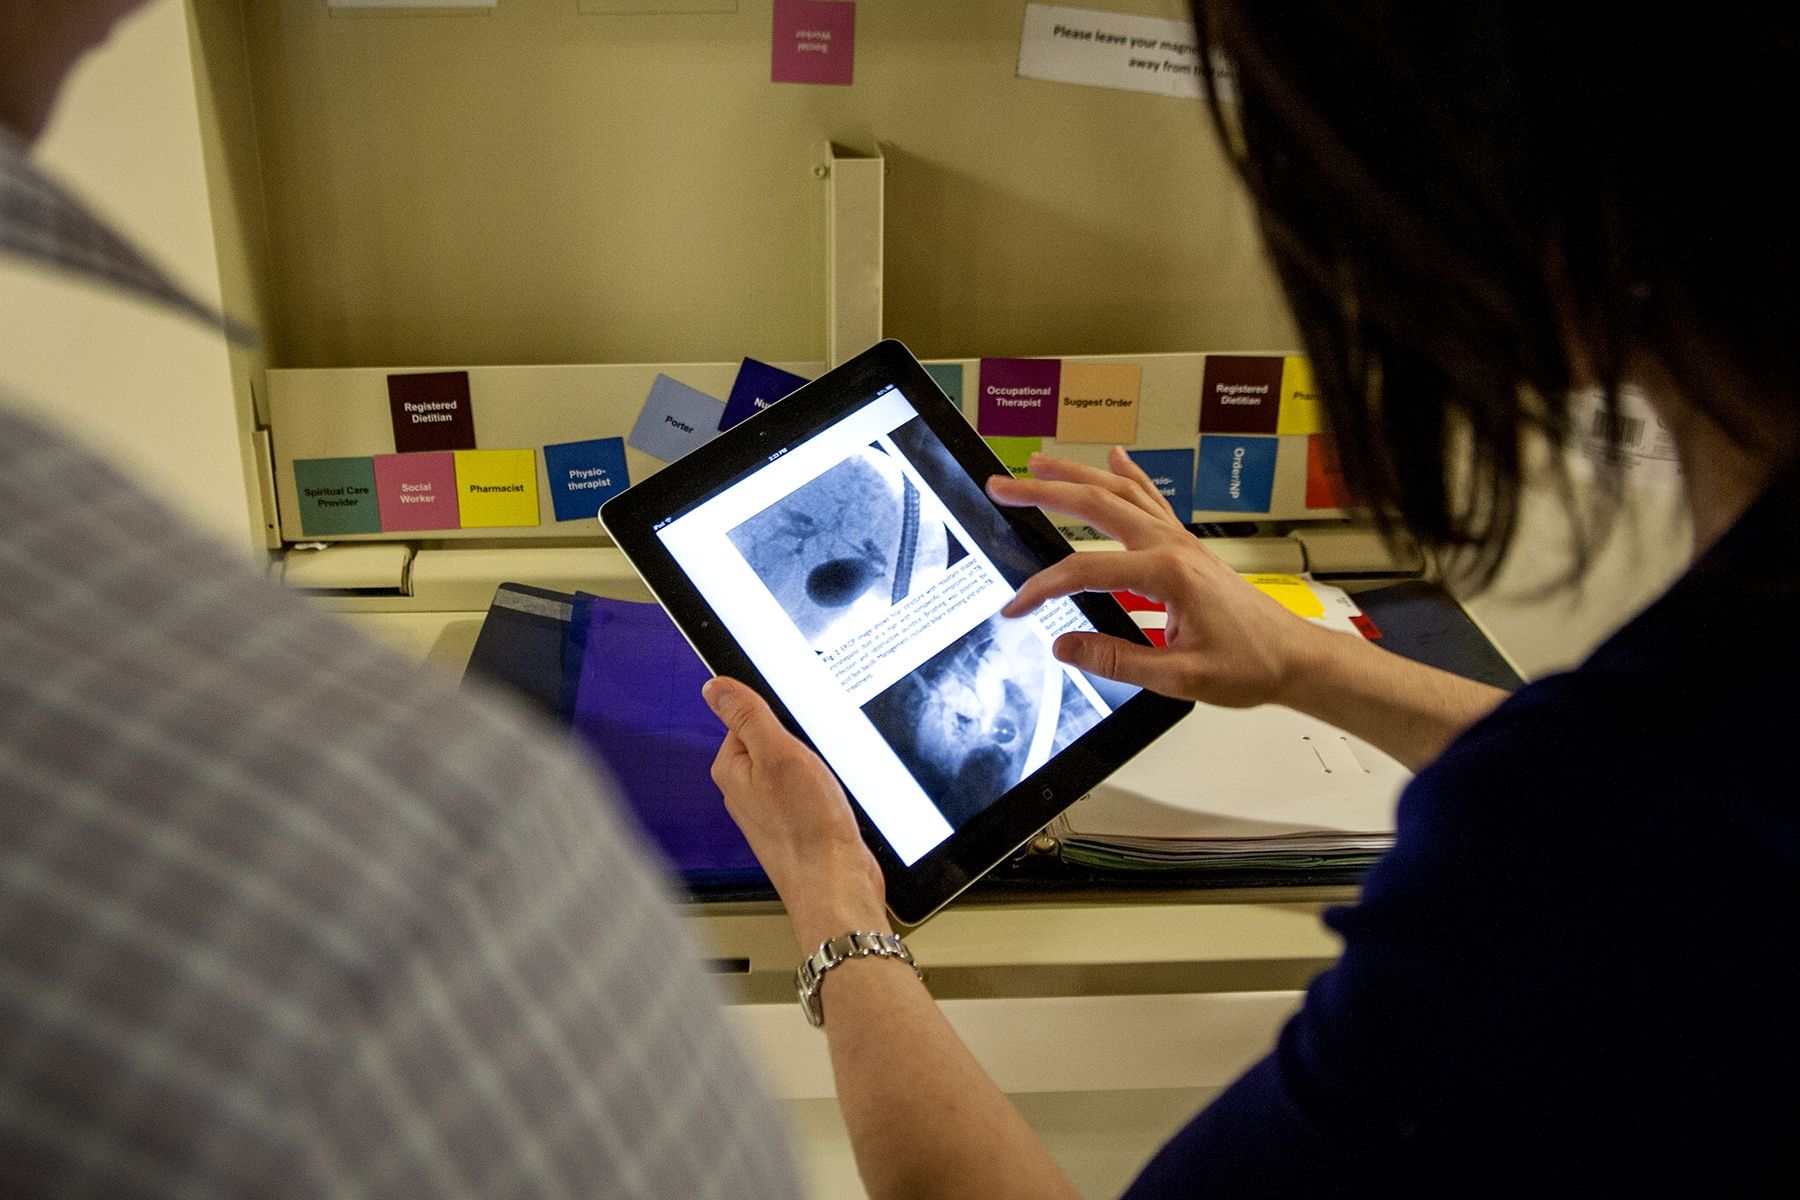 Dr. Catherine Barry uses her new iPad to review imaging files for patients on one of the units at KGH.